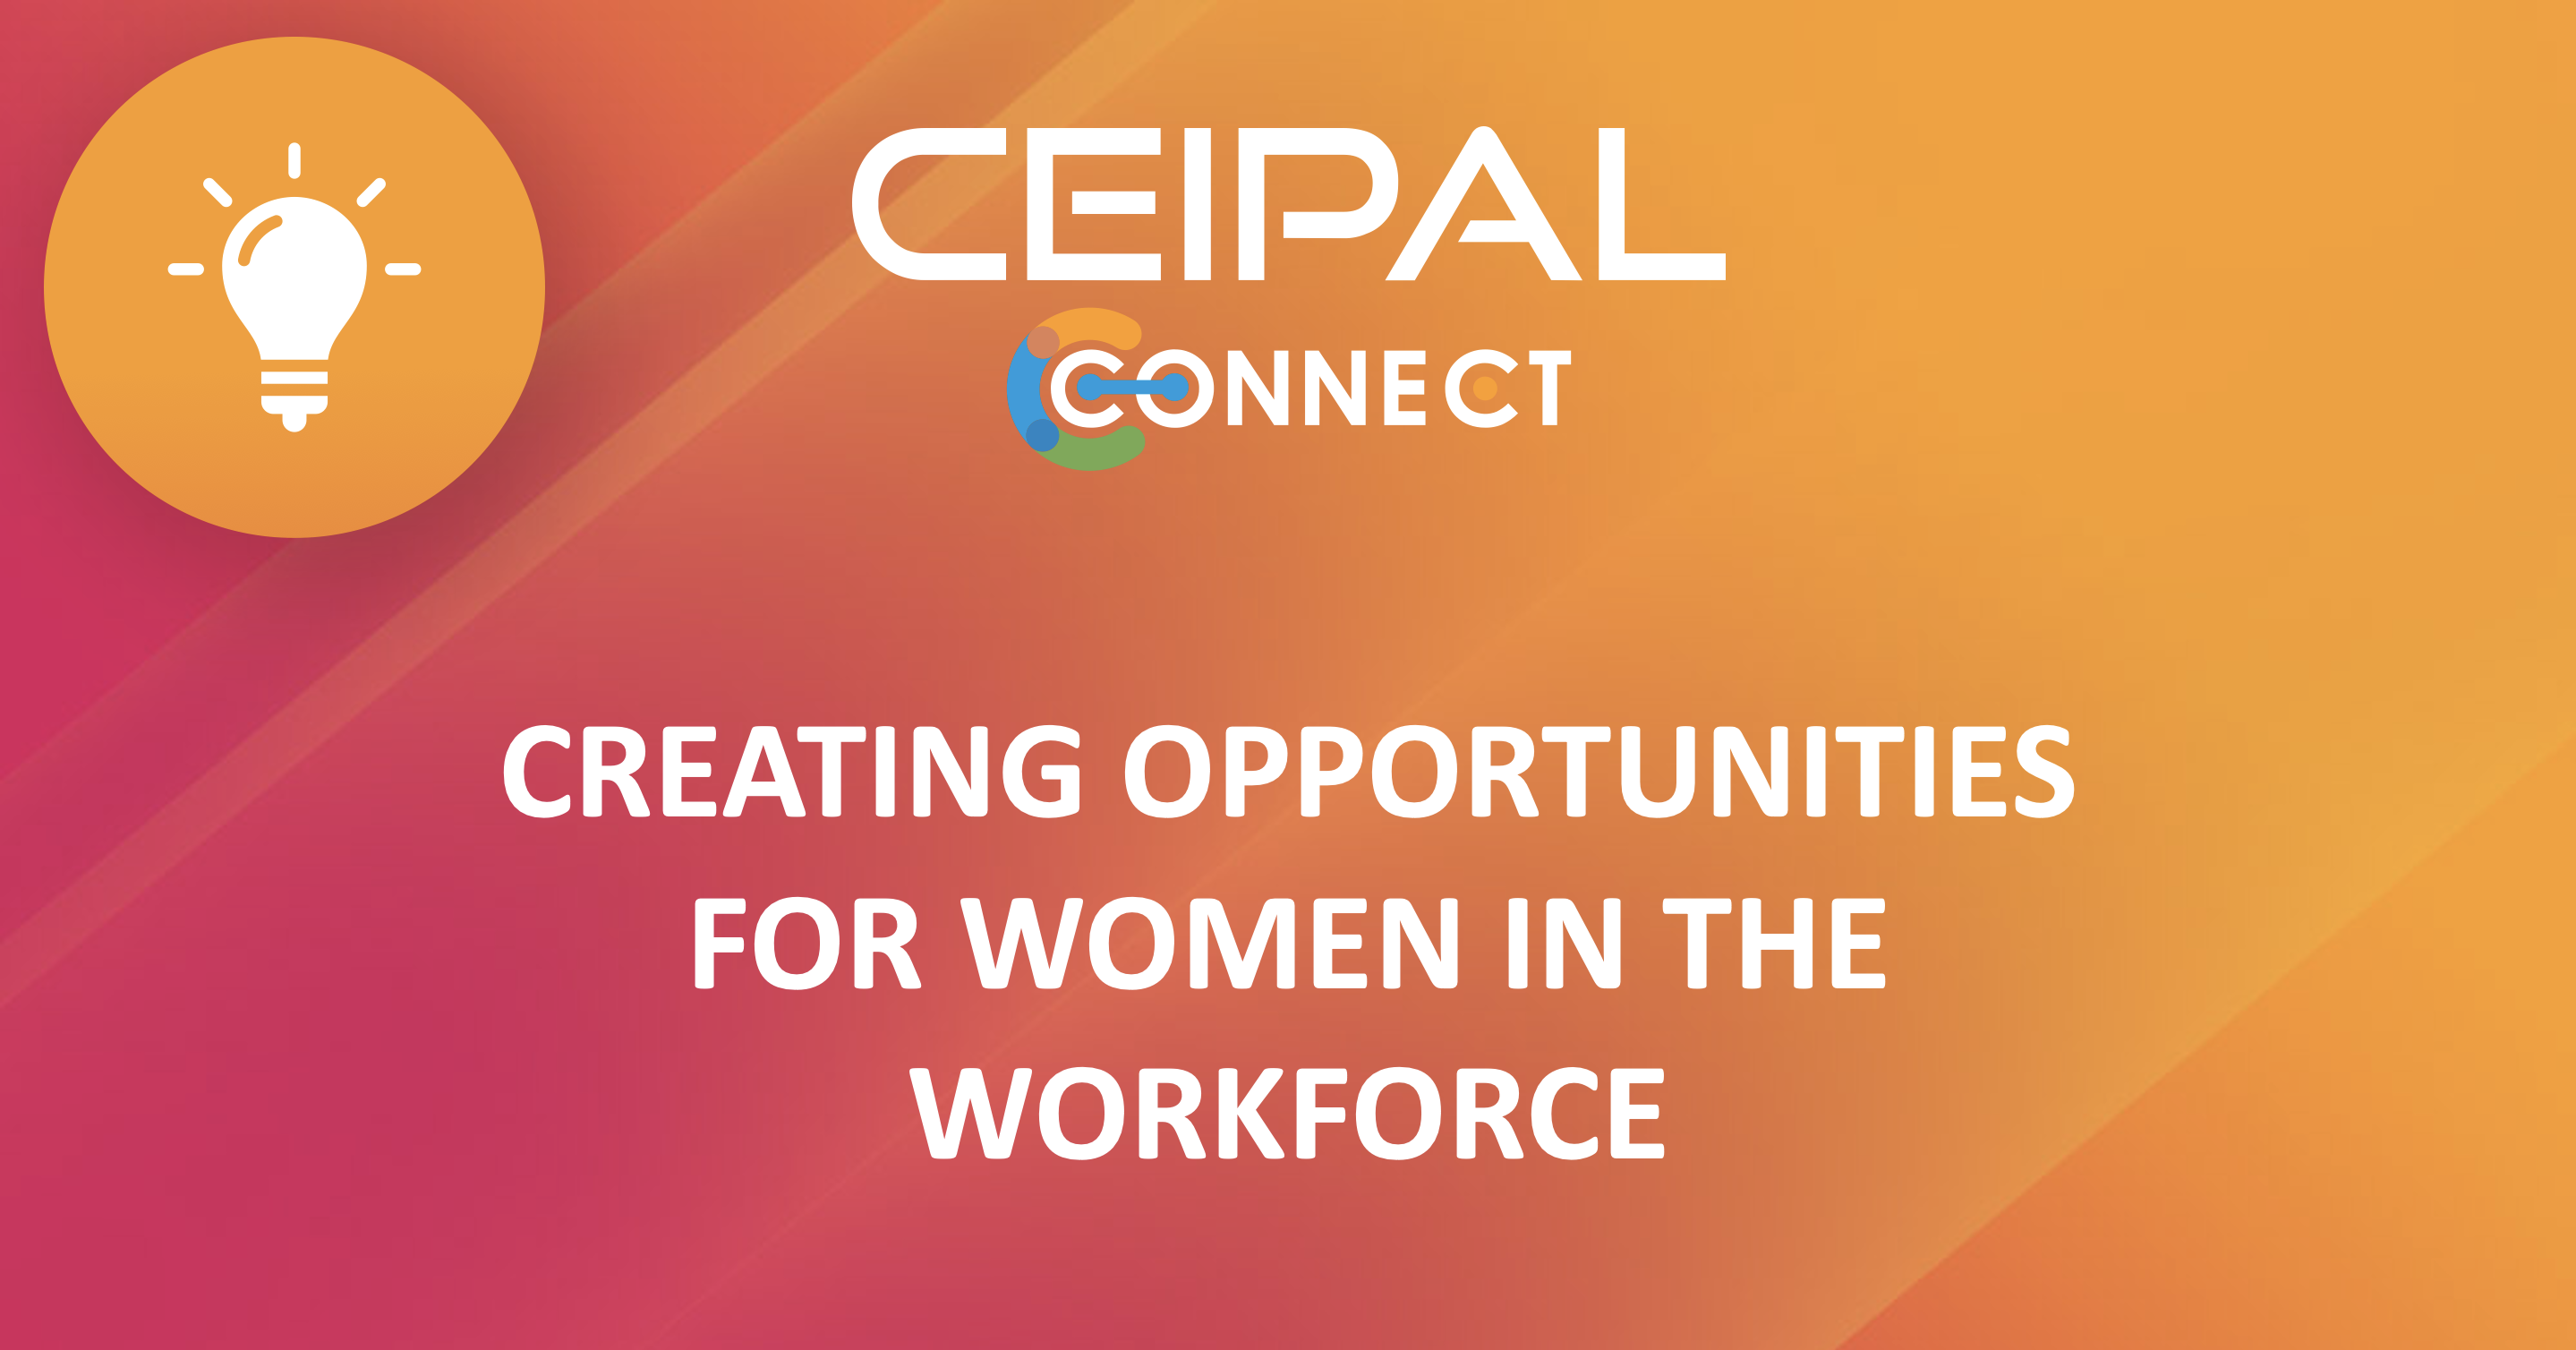 Panel Discussion: Creating Opportunities for Women in the Workforce